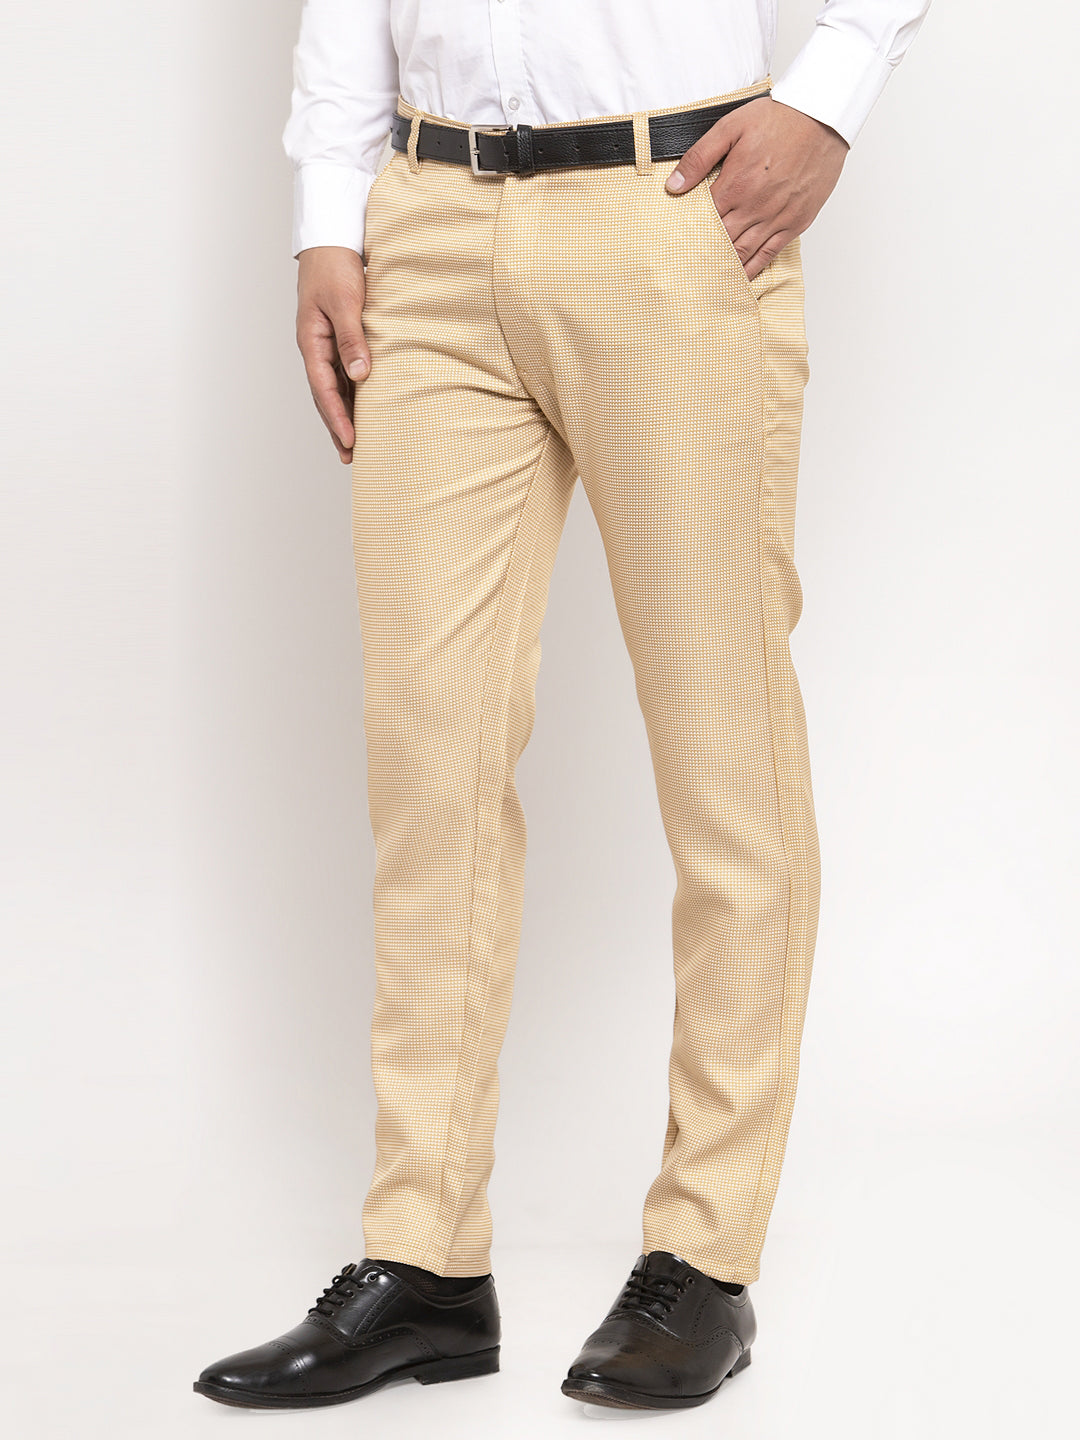 Buy KUNDAN Men's Poly-Viscose Dark Blue & Beige Colour Formal Trousers  (Pack of 2) at Amazon.in